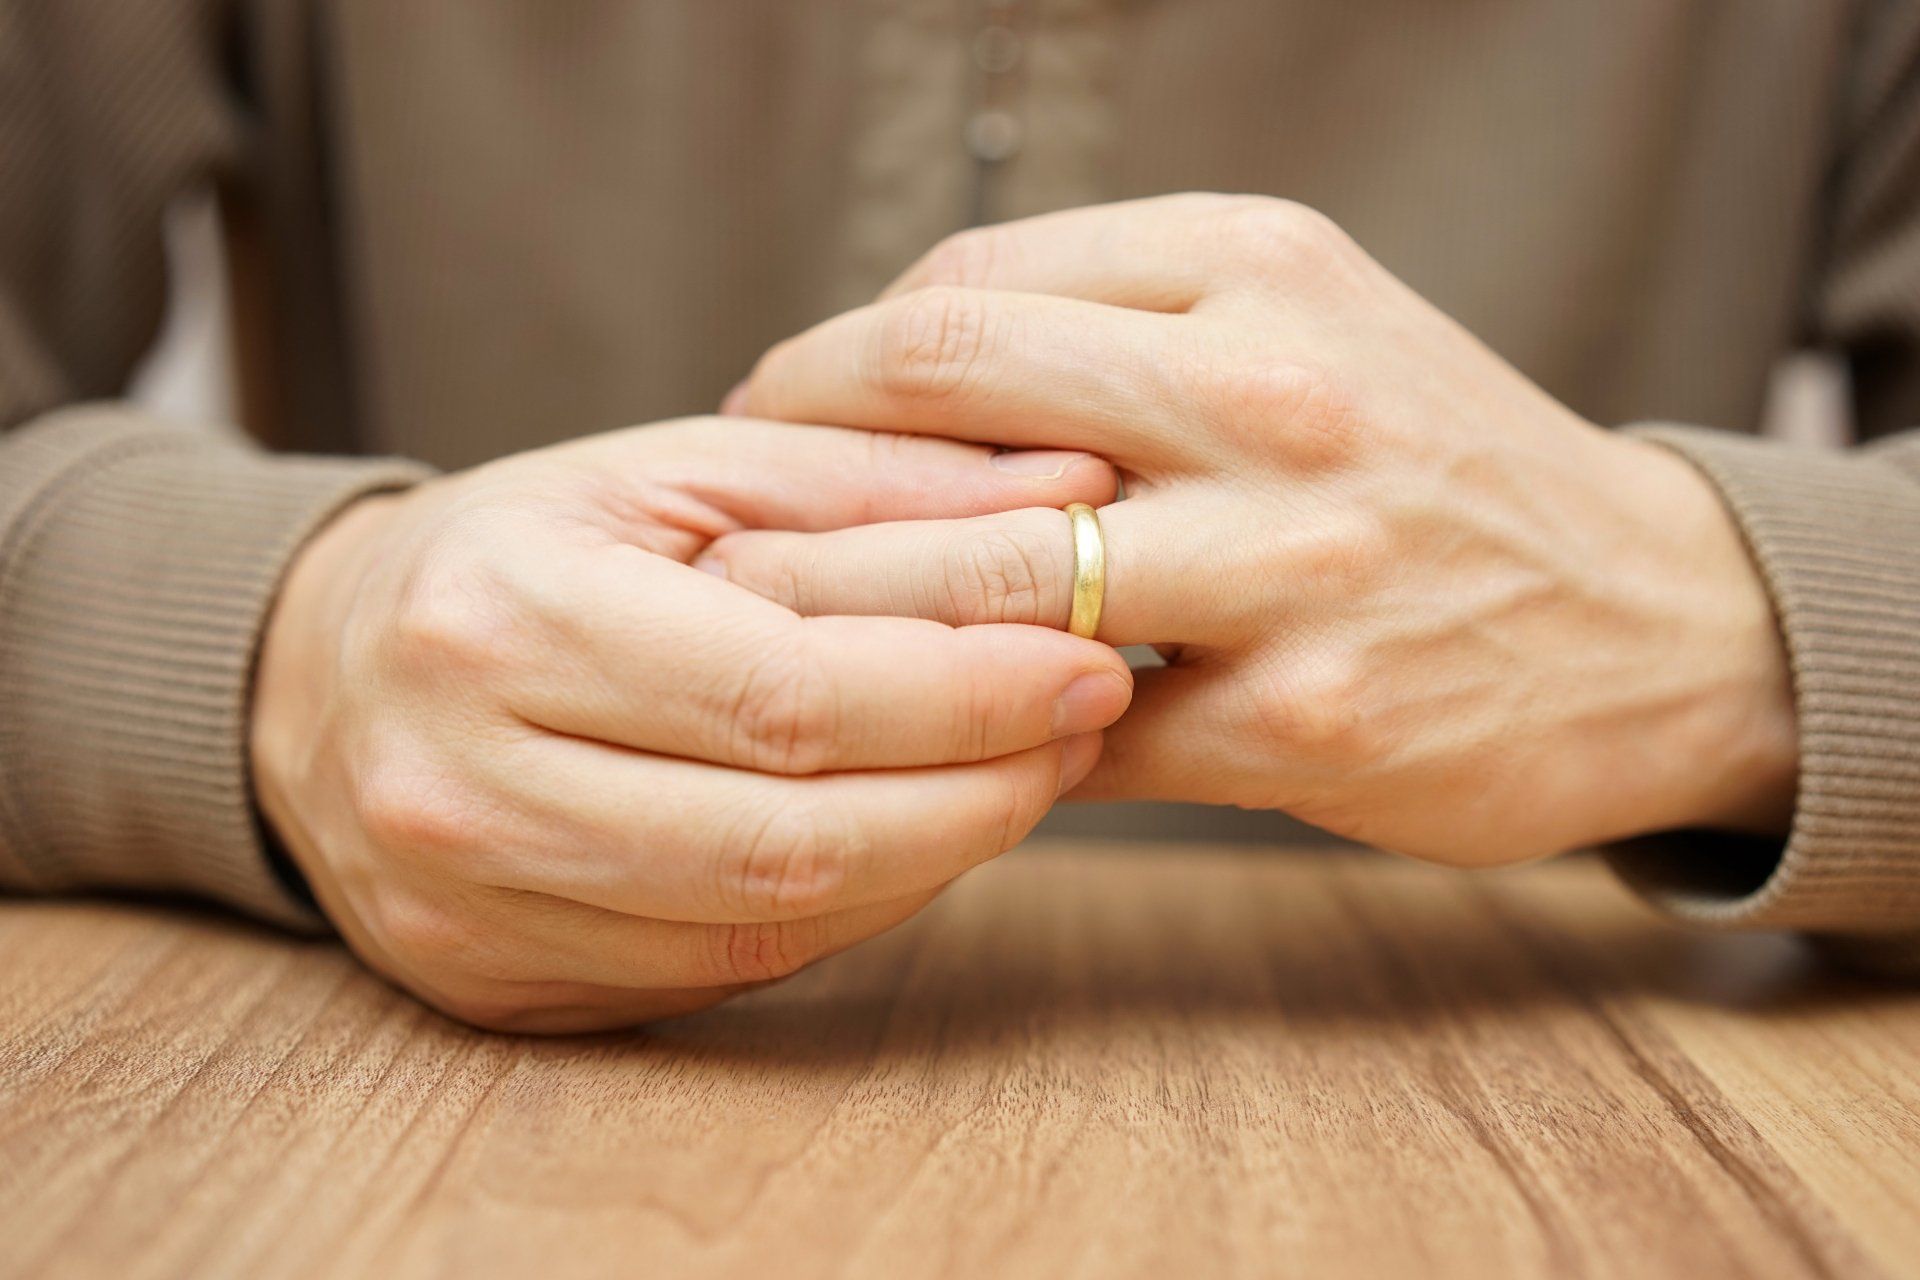 Woman's hands on a table, pulling off wedding band